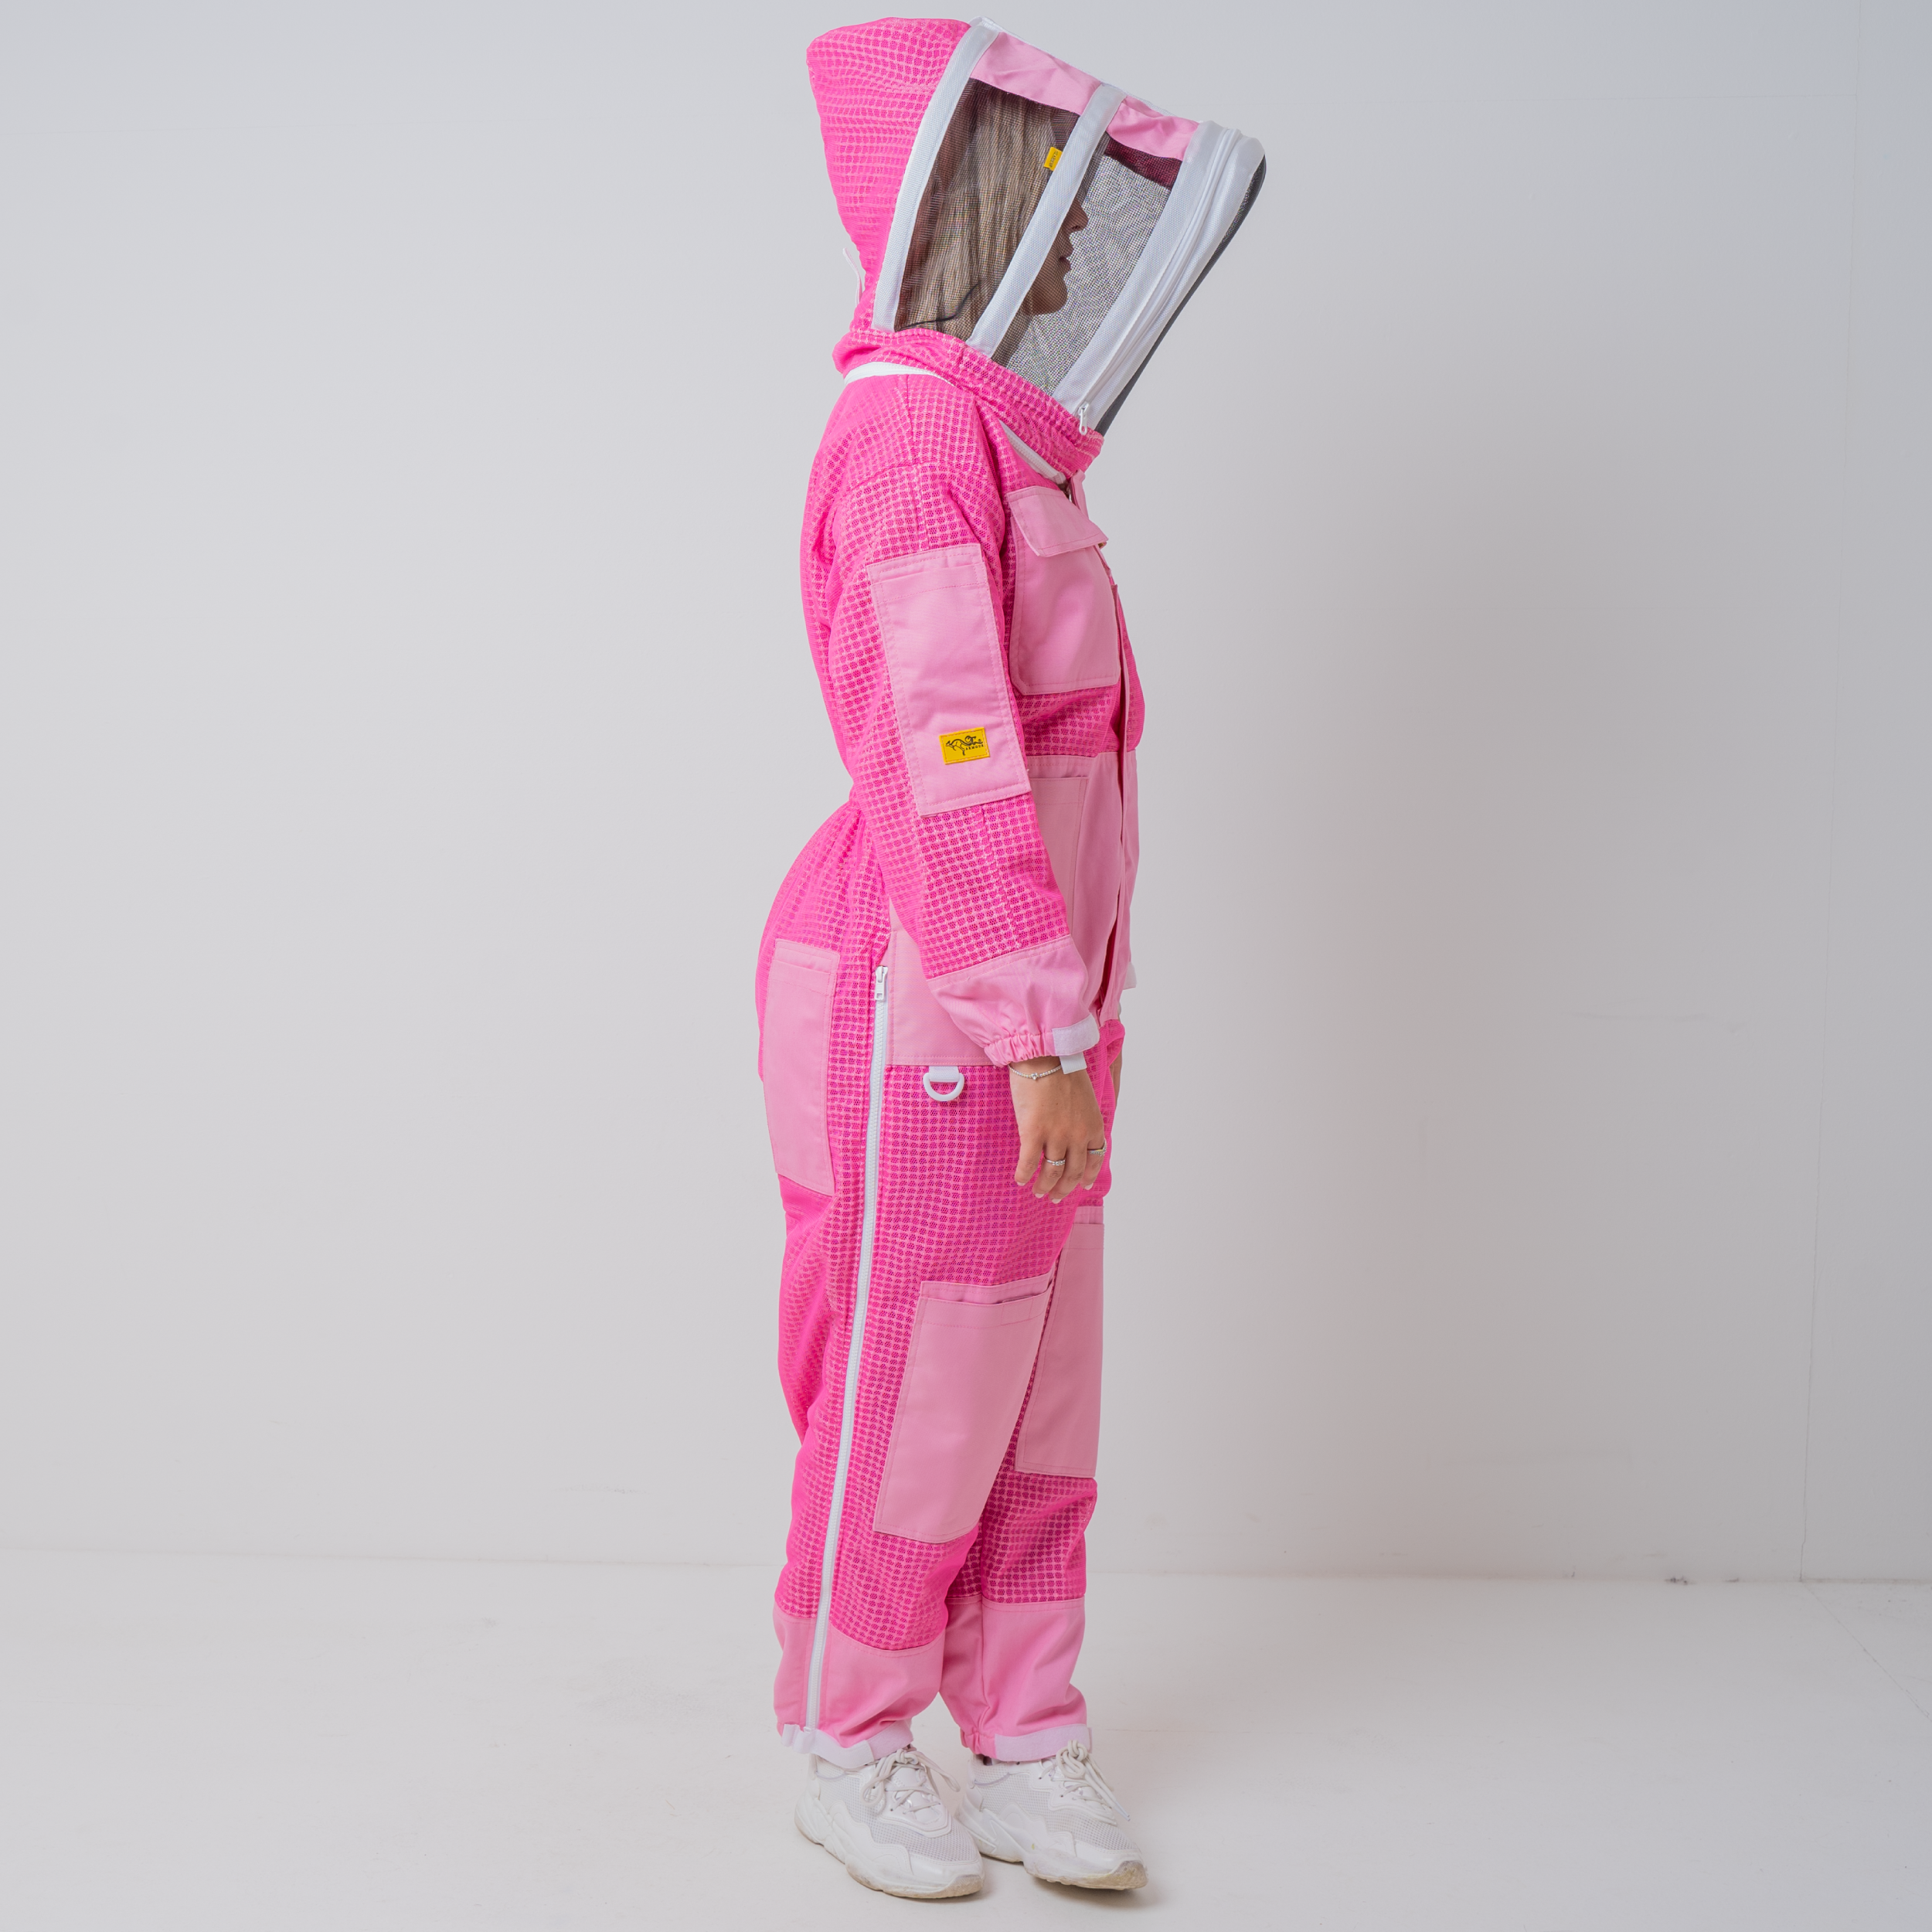 PINK Beekeeping Suit - Right Side